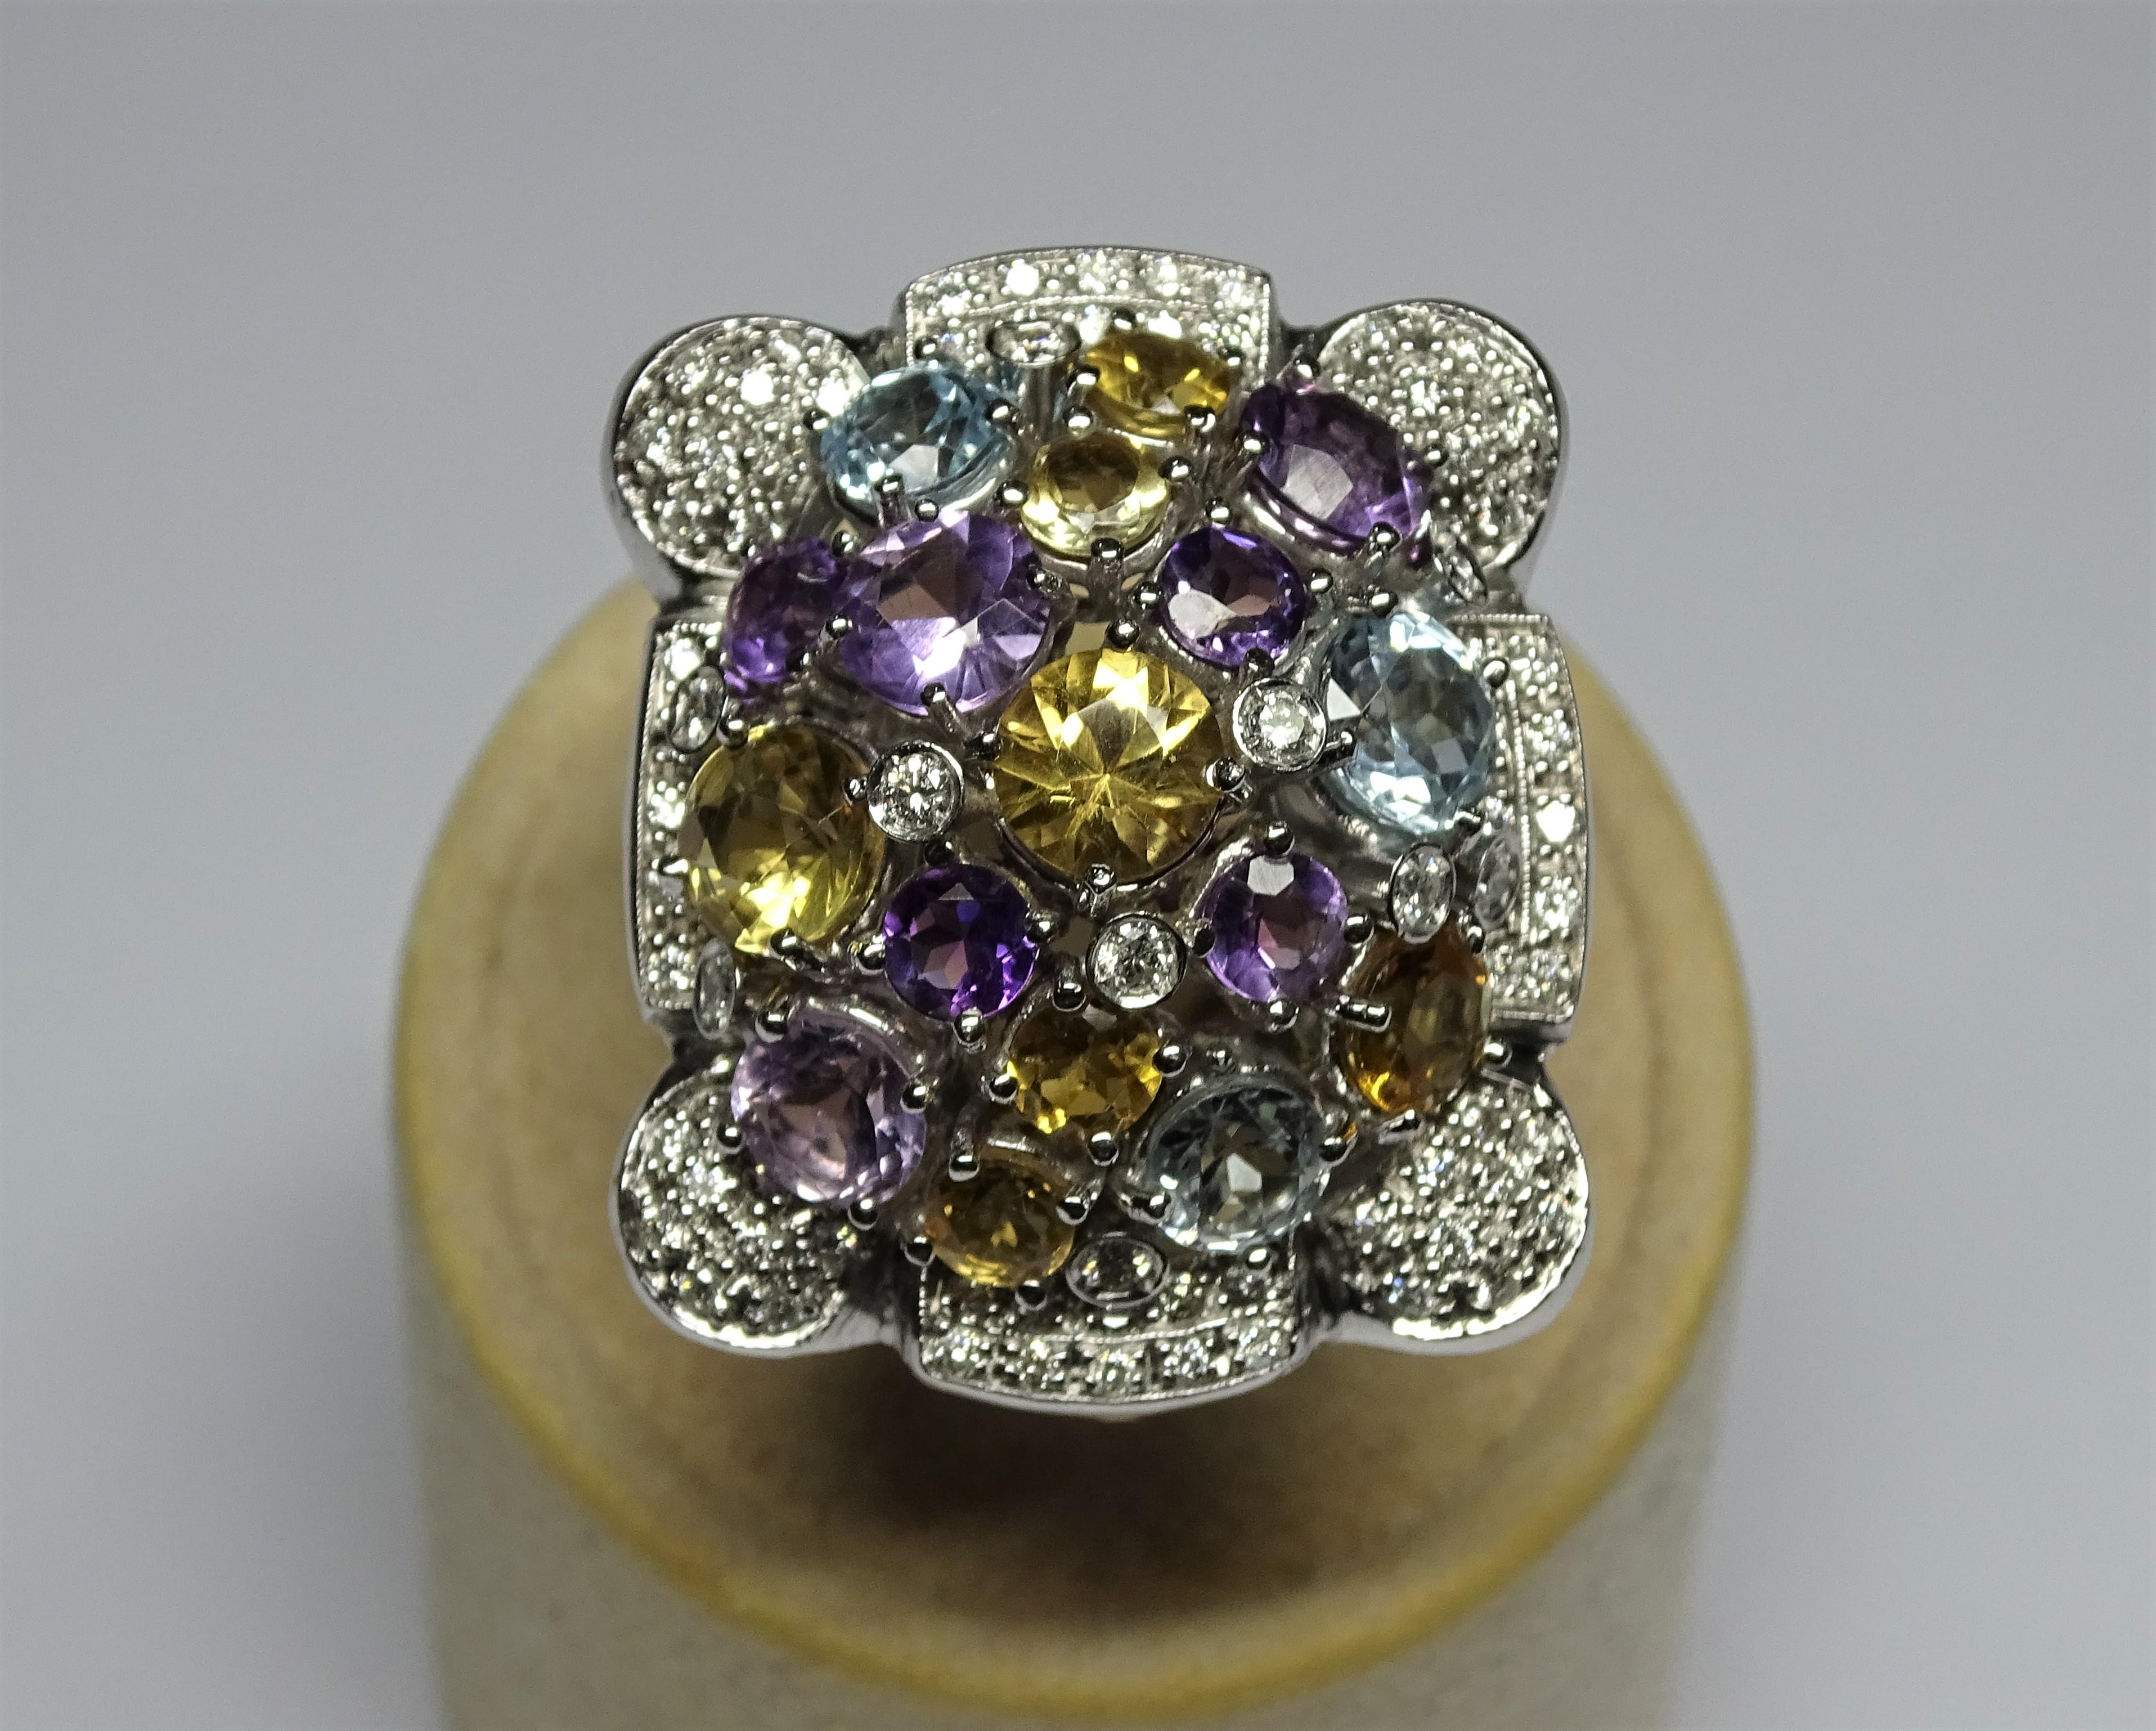 This Ring is made of 18K White Gold.
This Ring has 1.10 Carats of White Diamonds.
This Ring has 11.35 Carats of Citrine, Amethyst and Blue Topaz.
Size ITA: 14.5 - USA: 7
We're a workshop so every piece is handmade, customizable and resizable.